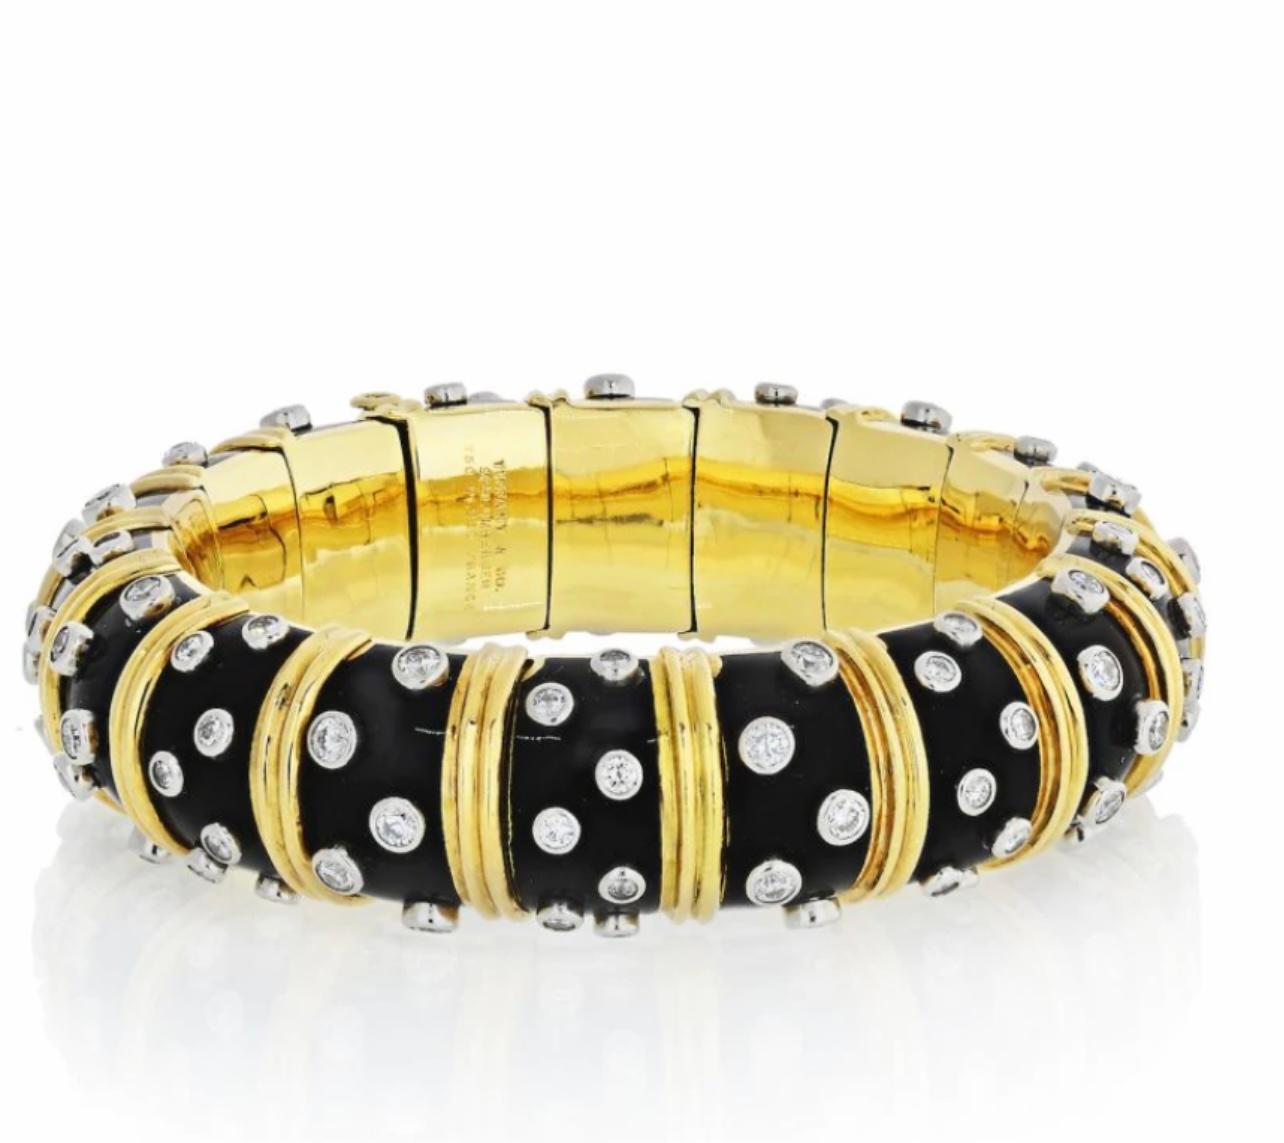 A DIAMOND AND BLACK ENAMEL BANGLE BRACELET, BY JEAN SCHLUMBERGER, TIFFANY & CO.
Designed as a Black paillonné enamel hinged bangle, decorated with collet-set diamonds and sculpted gold vertical bands, 6 3/4 ins. inner diameter, mounted in platinum